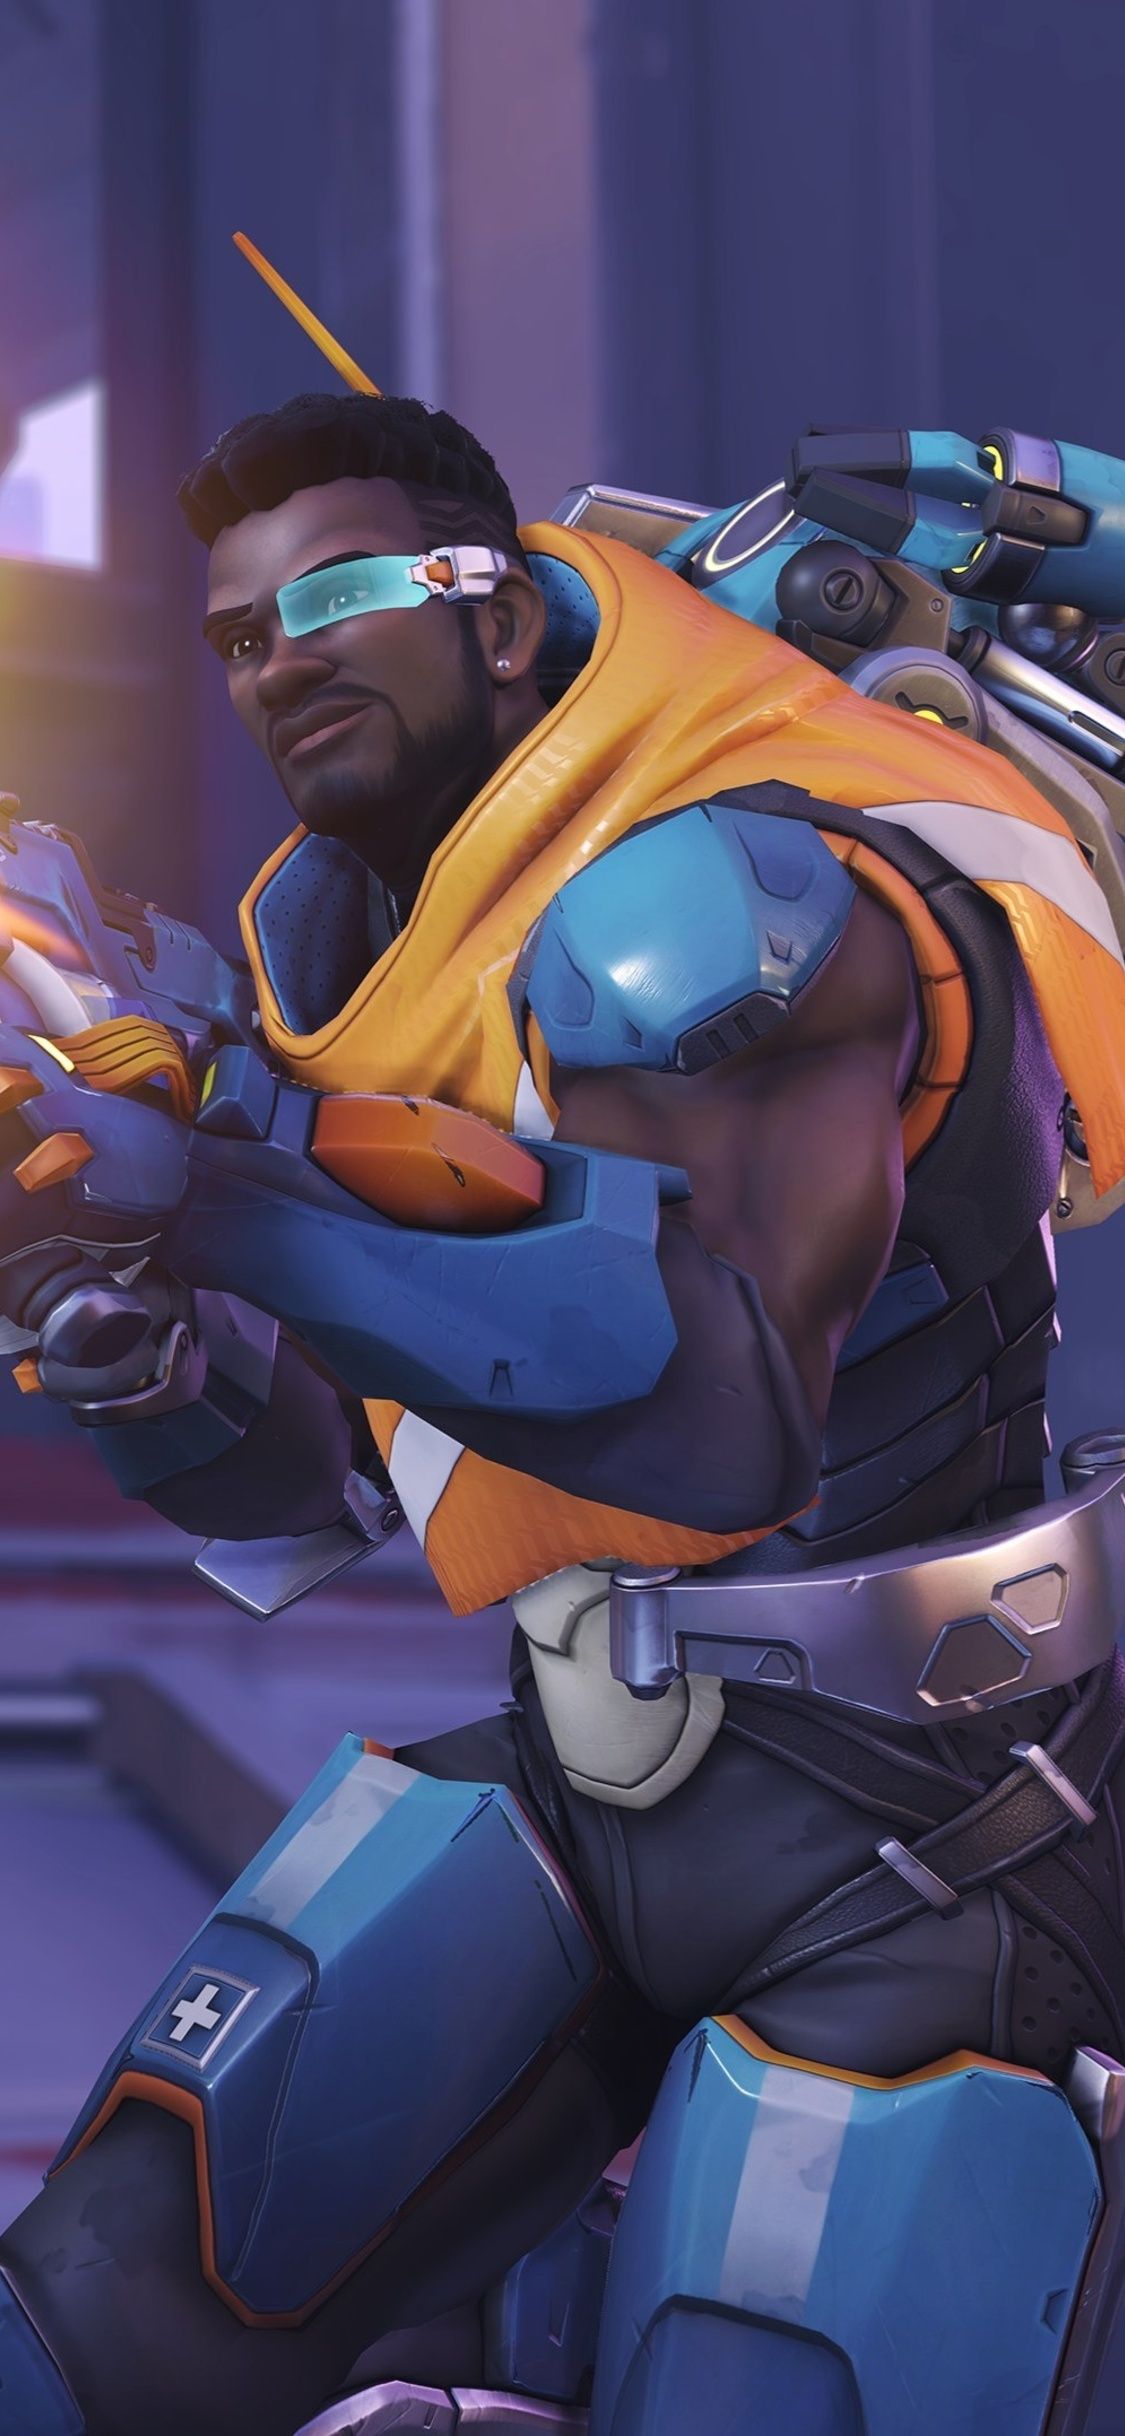 Baptiste Overwatch Video Game iPhone XS, iPhone iPhone